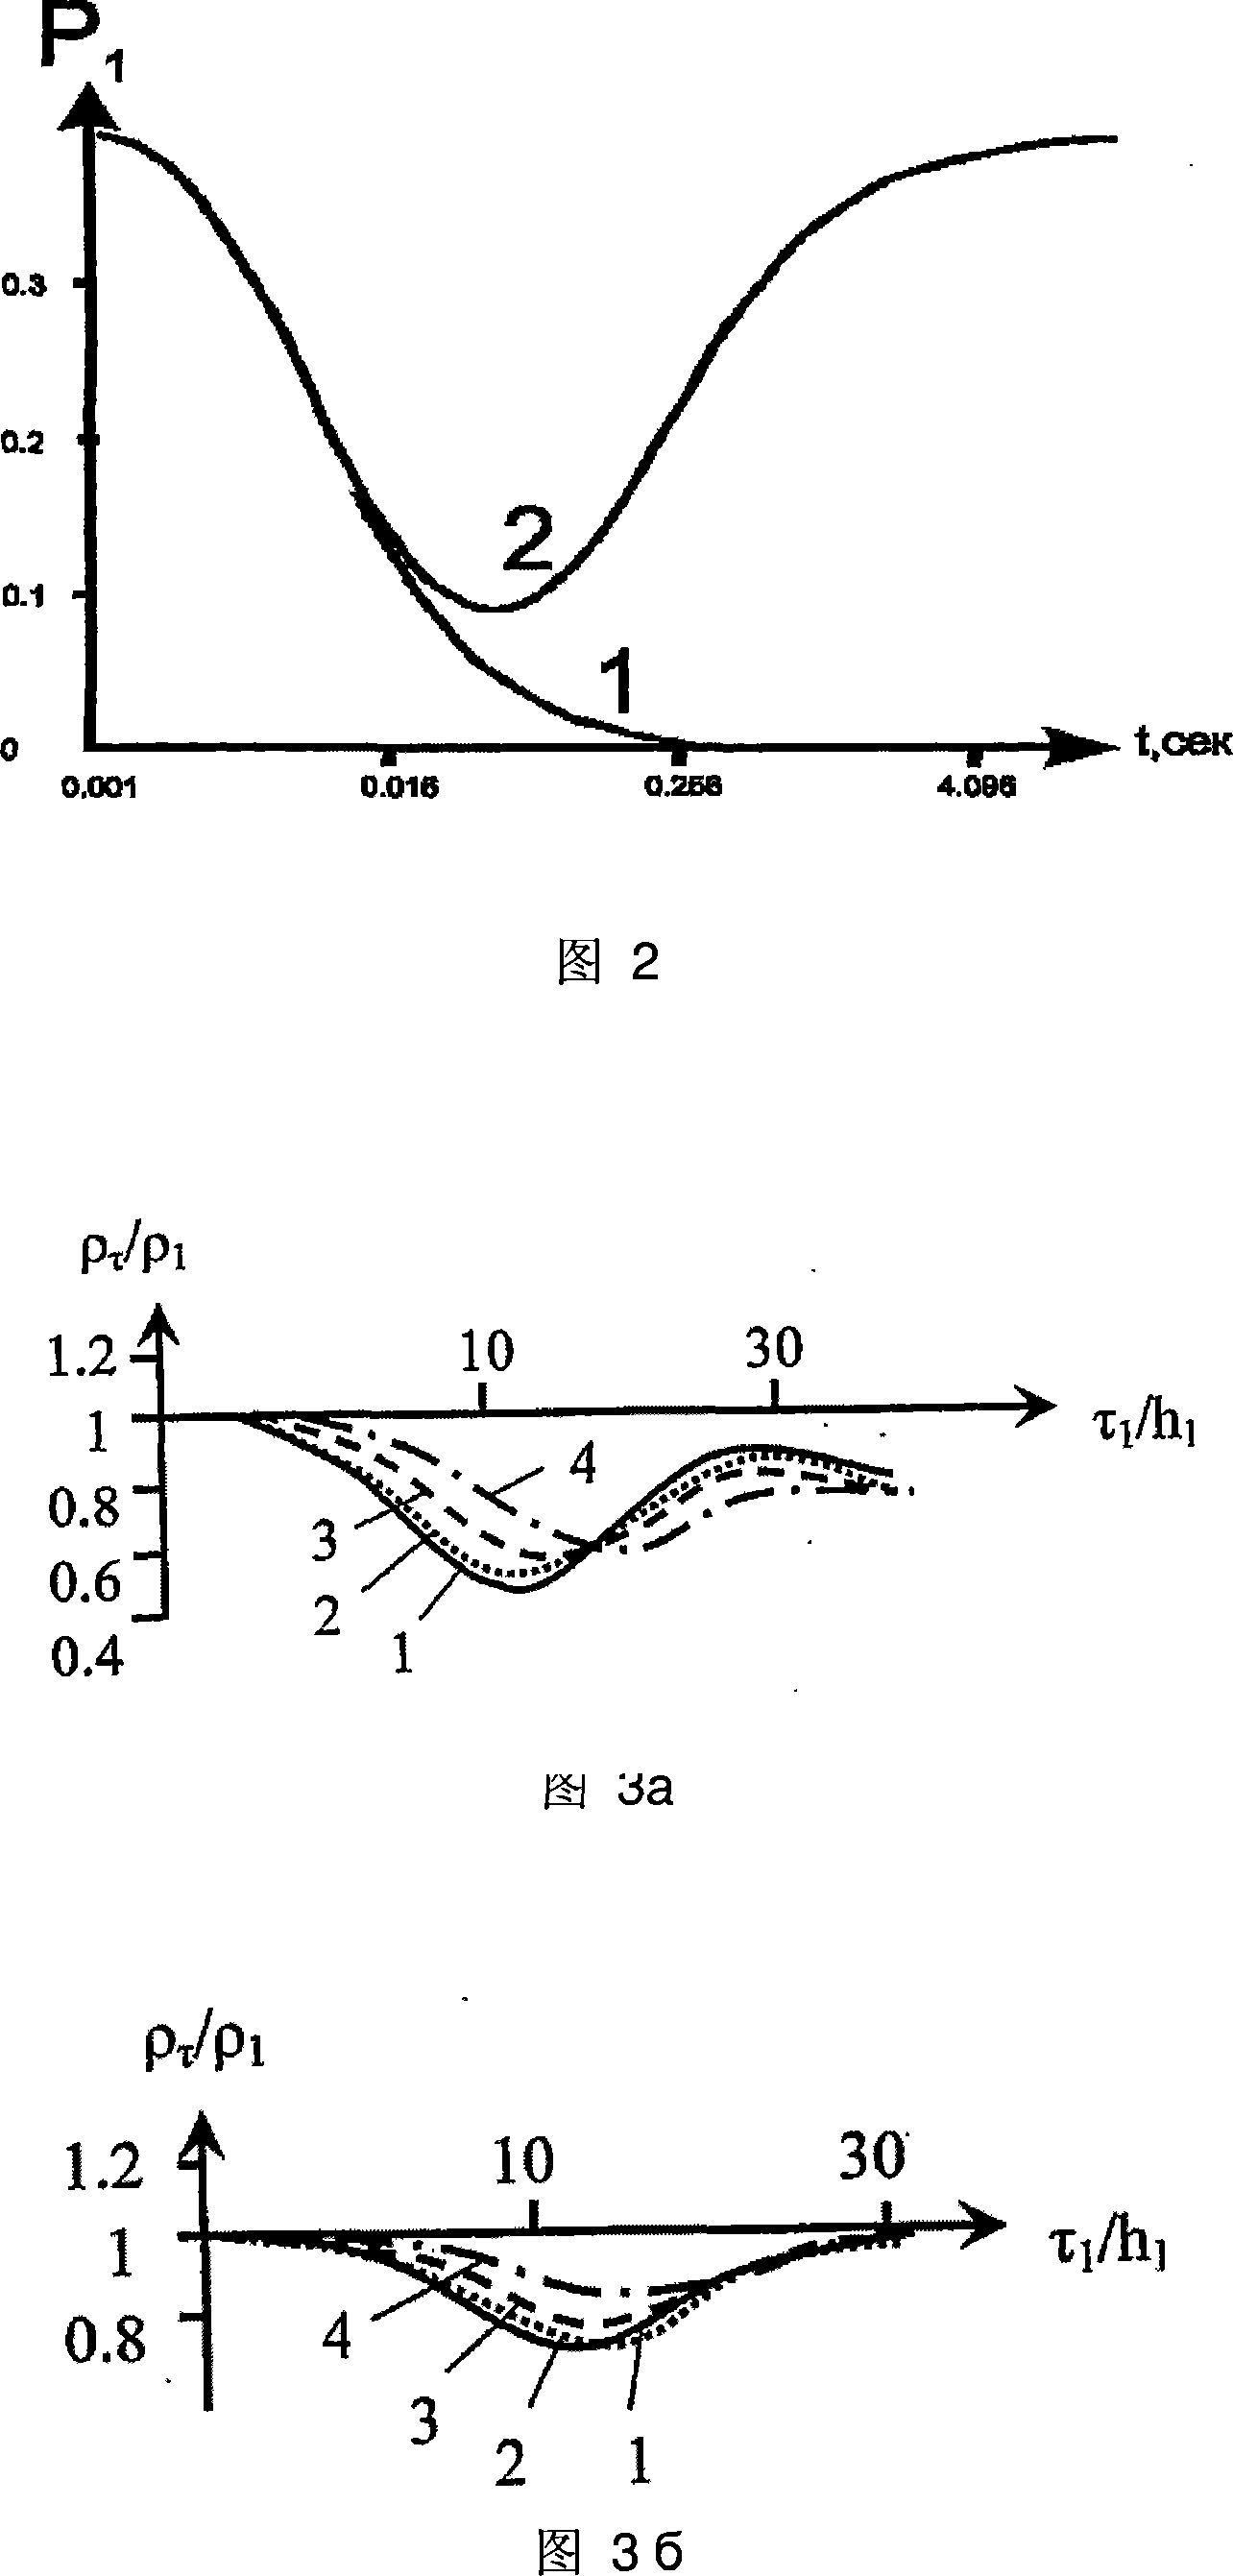 Electromagnetic sounding method using a transient field spatial derivation on several separations